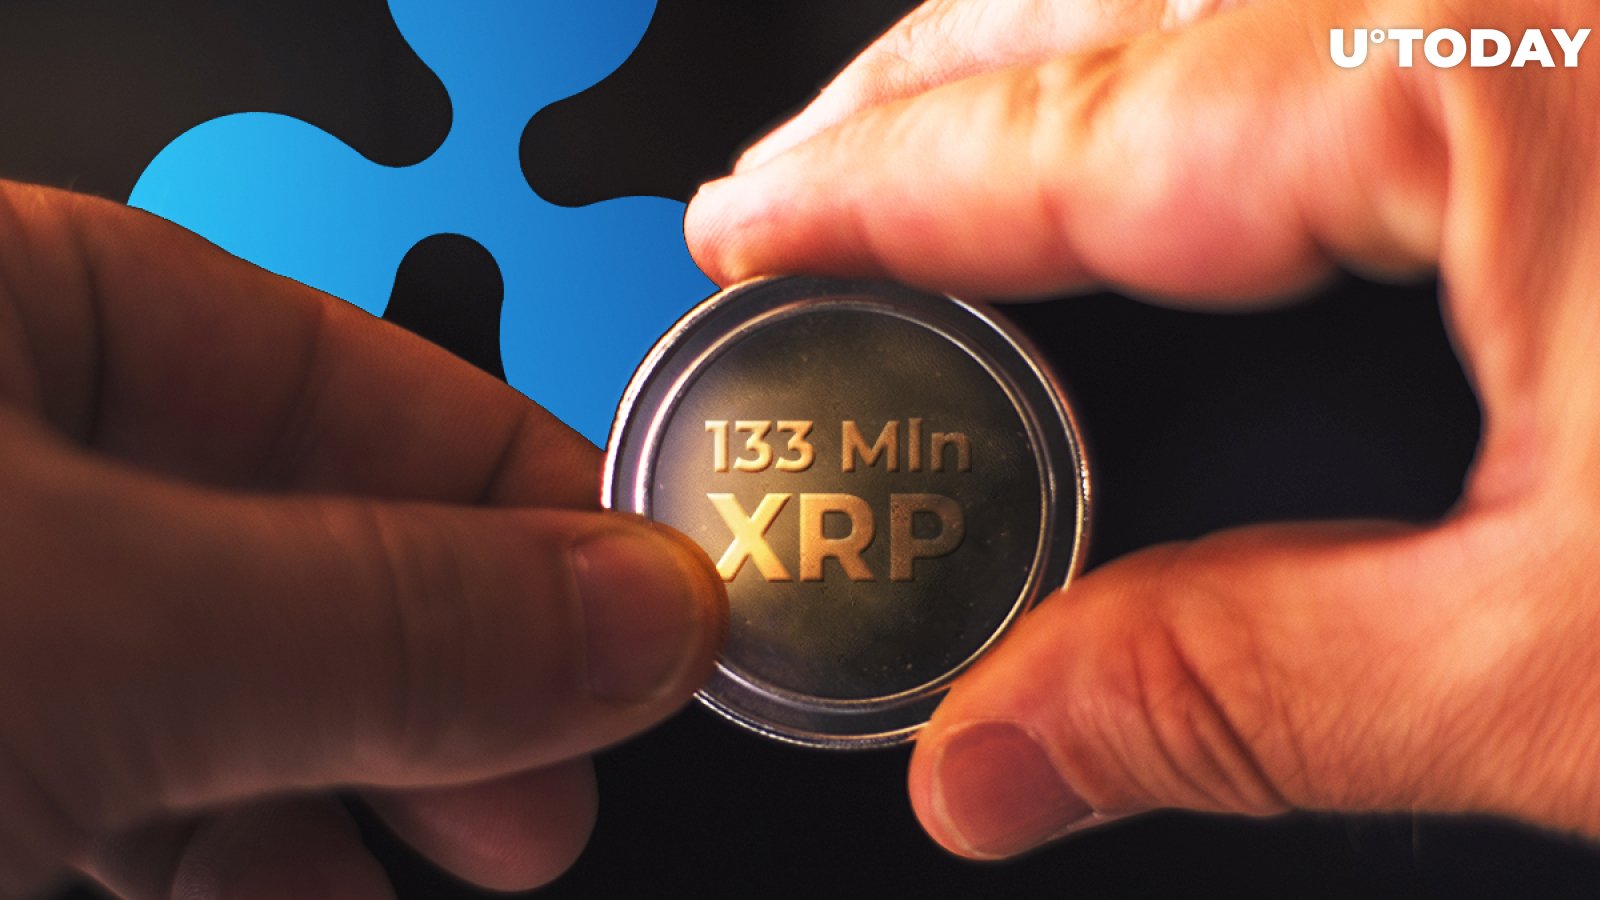 Ripple Wires 133 Mln XRP to Jed McCaleb Along with Locking 800 Mln XRP Back in Escrow